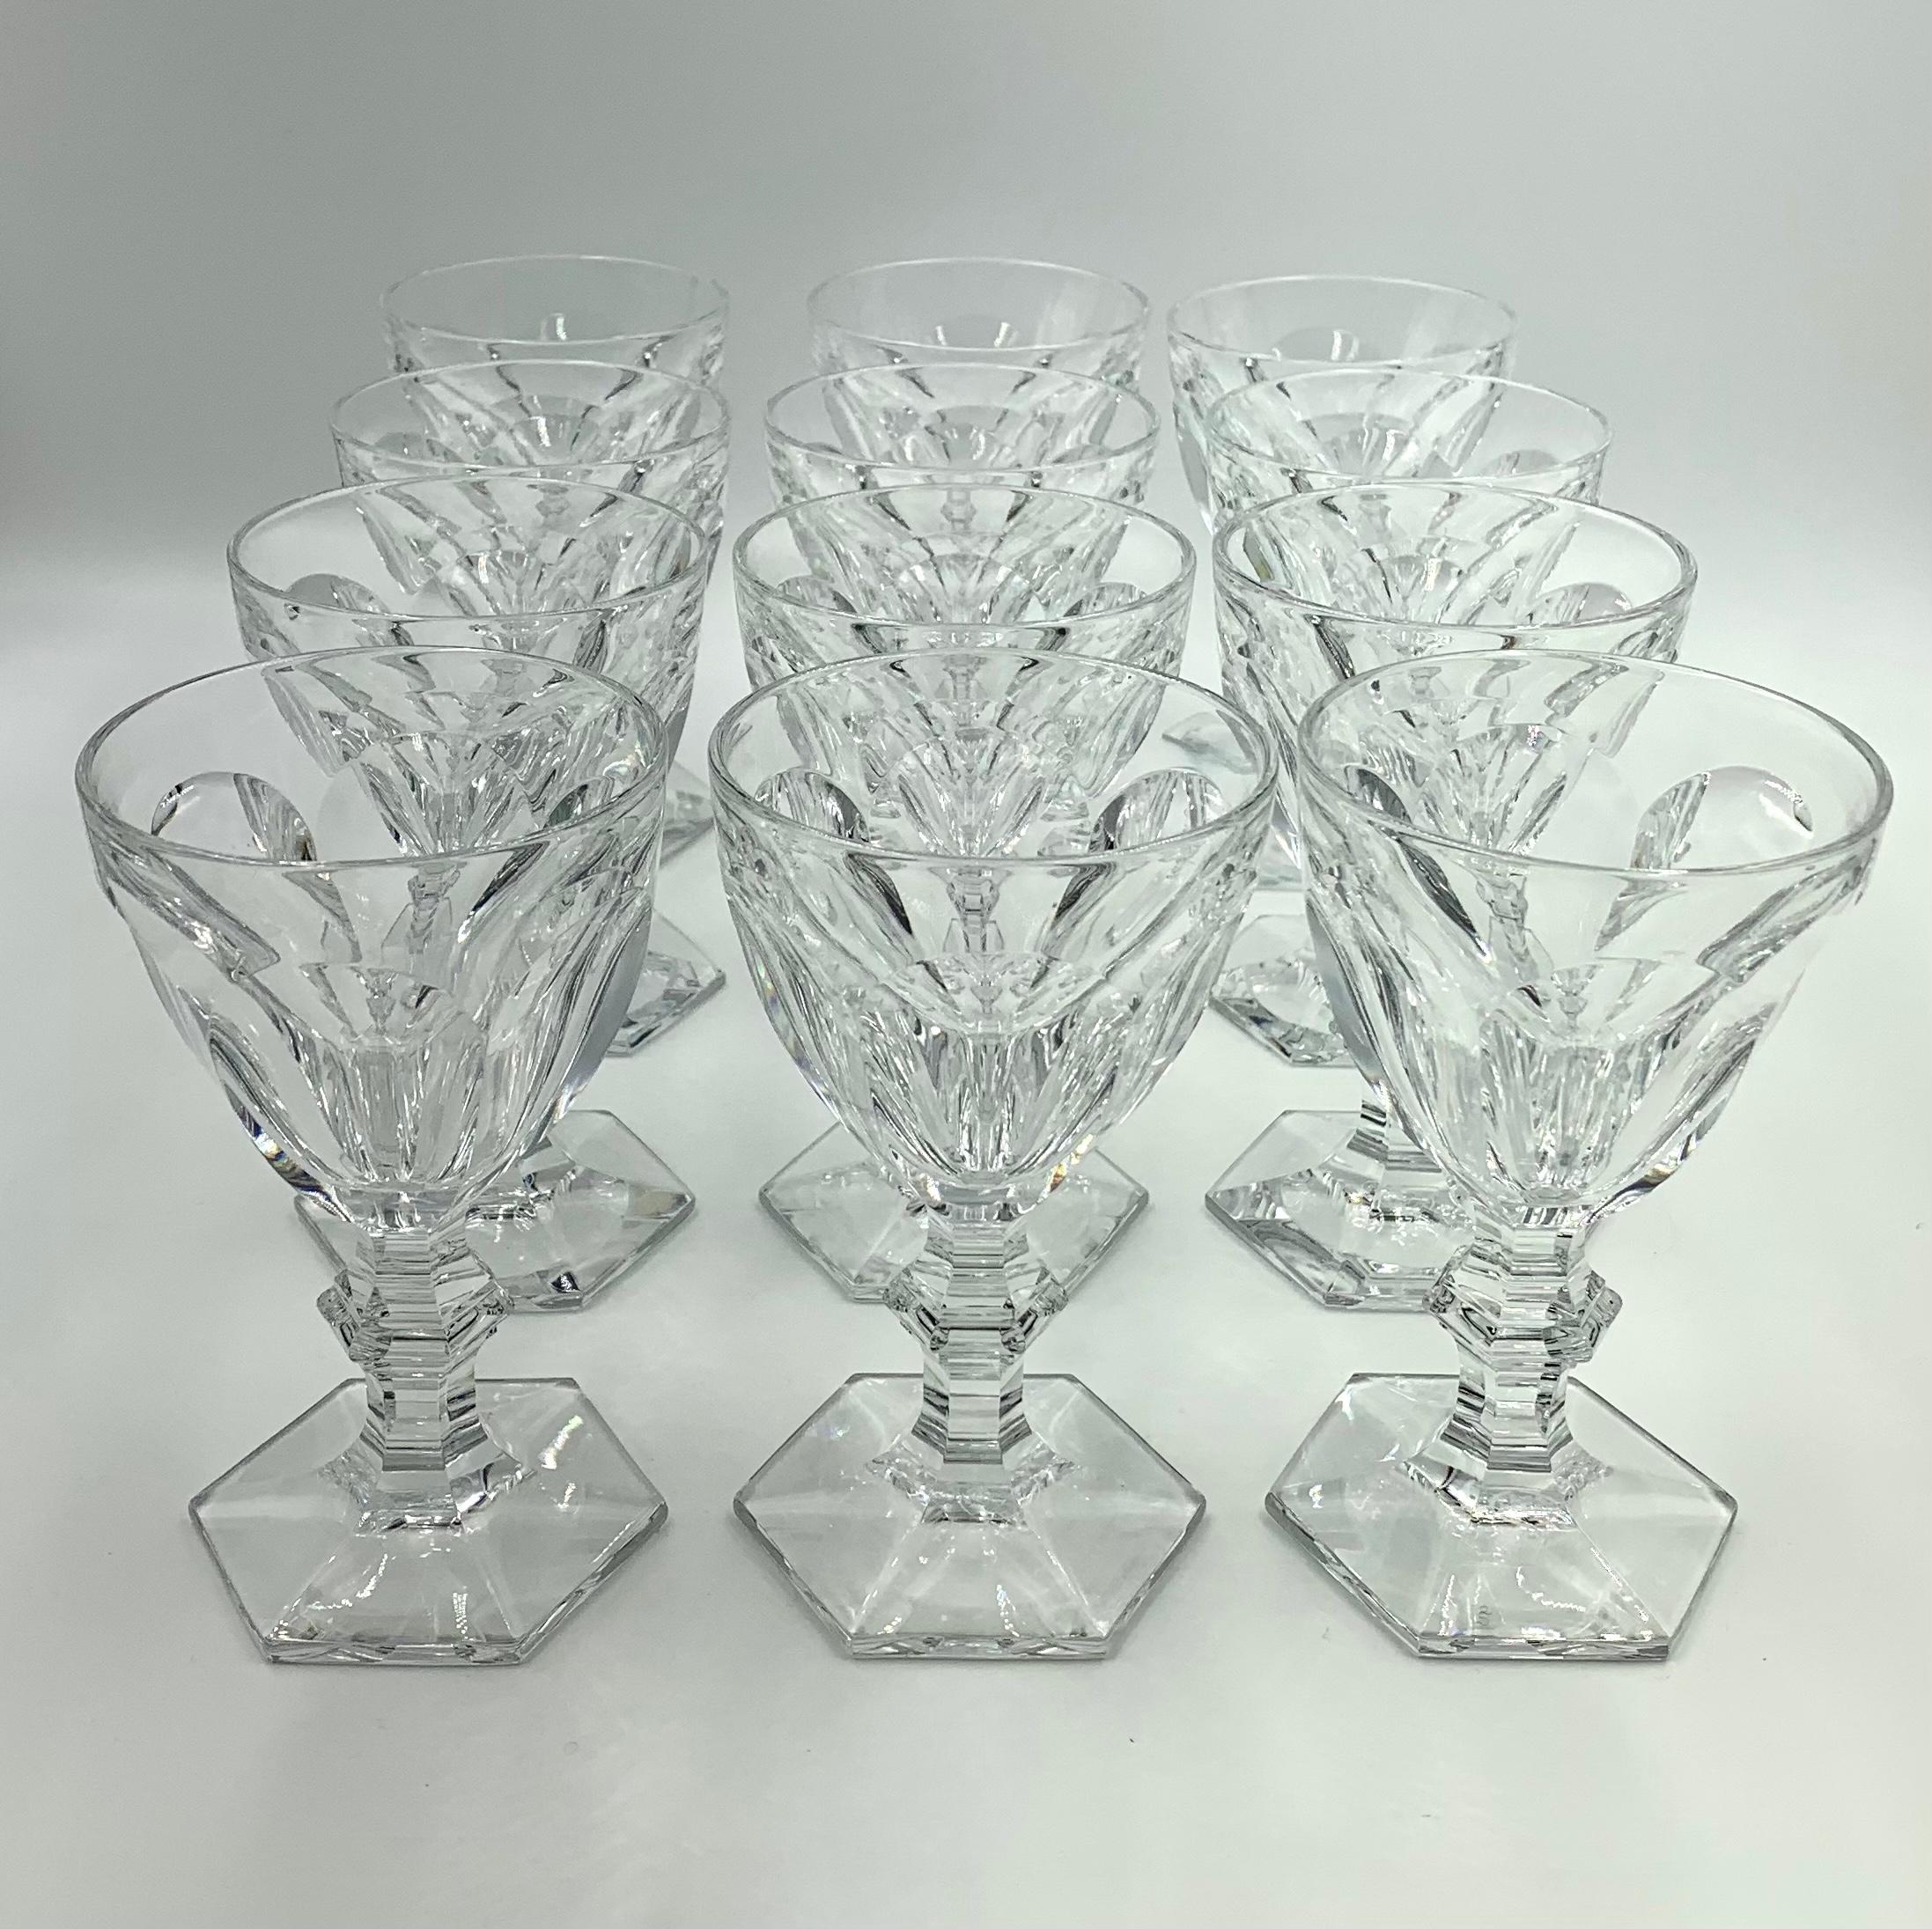 Baccarat Harcourt 1841 Set of 12 Wine Glasses In Good Condition For Sale In New York, NY